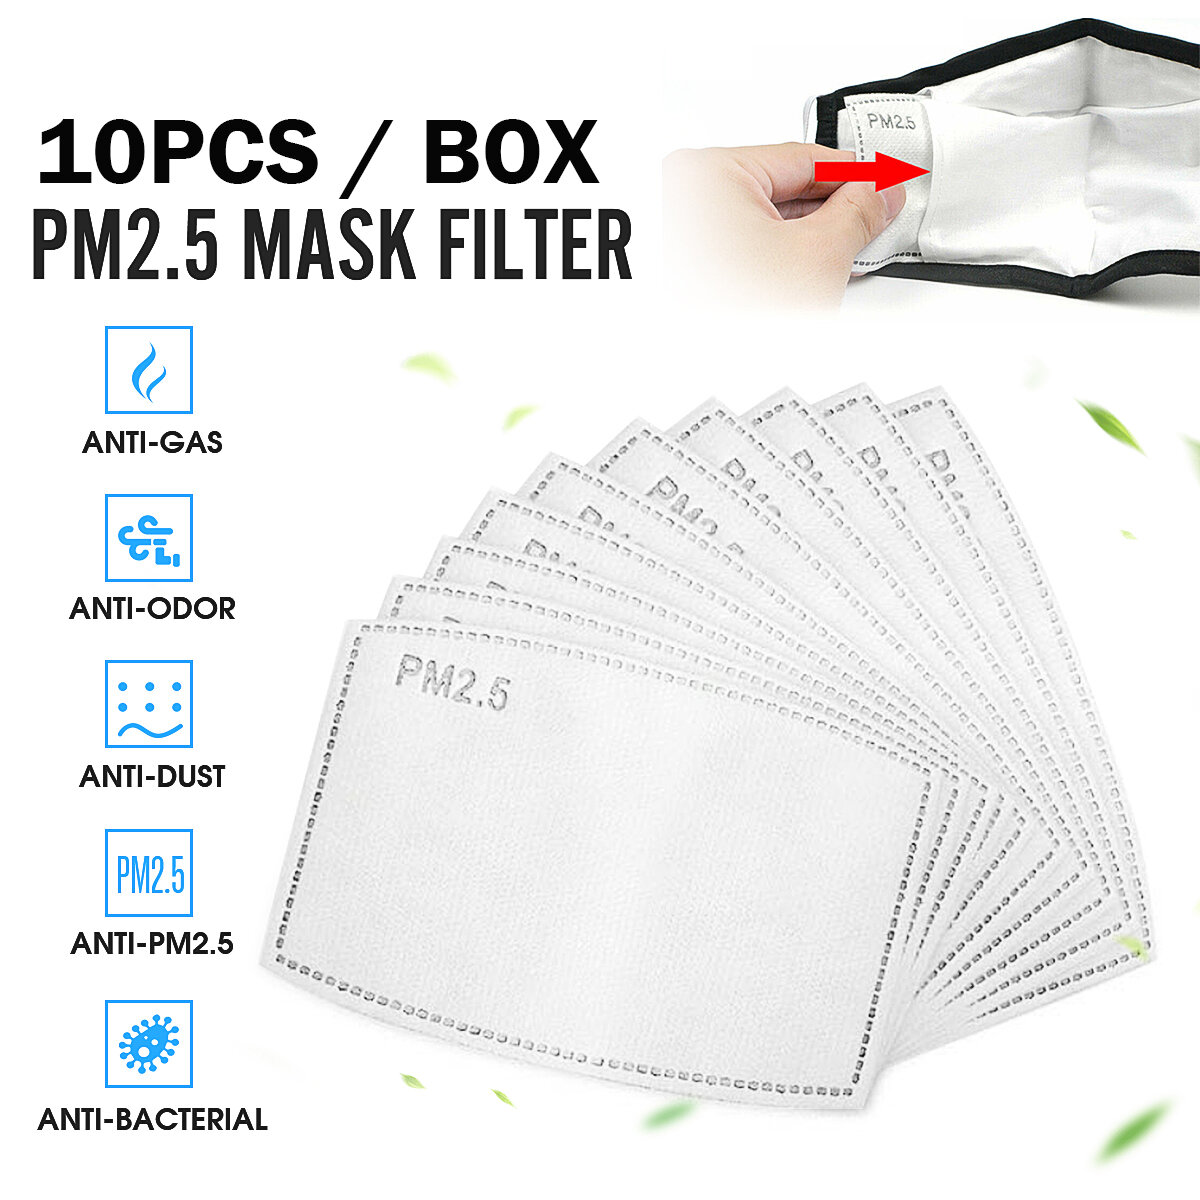 

10 PCS / BOX PM2.5 P2 Face Mask Filter Activated Carbon Breathing Filters, #01